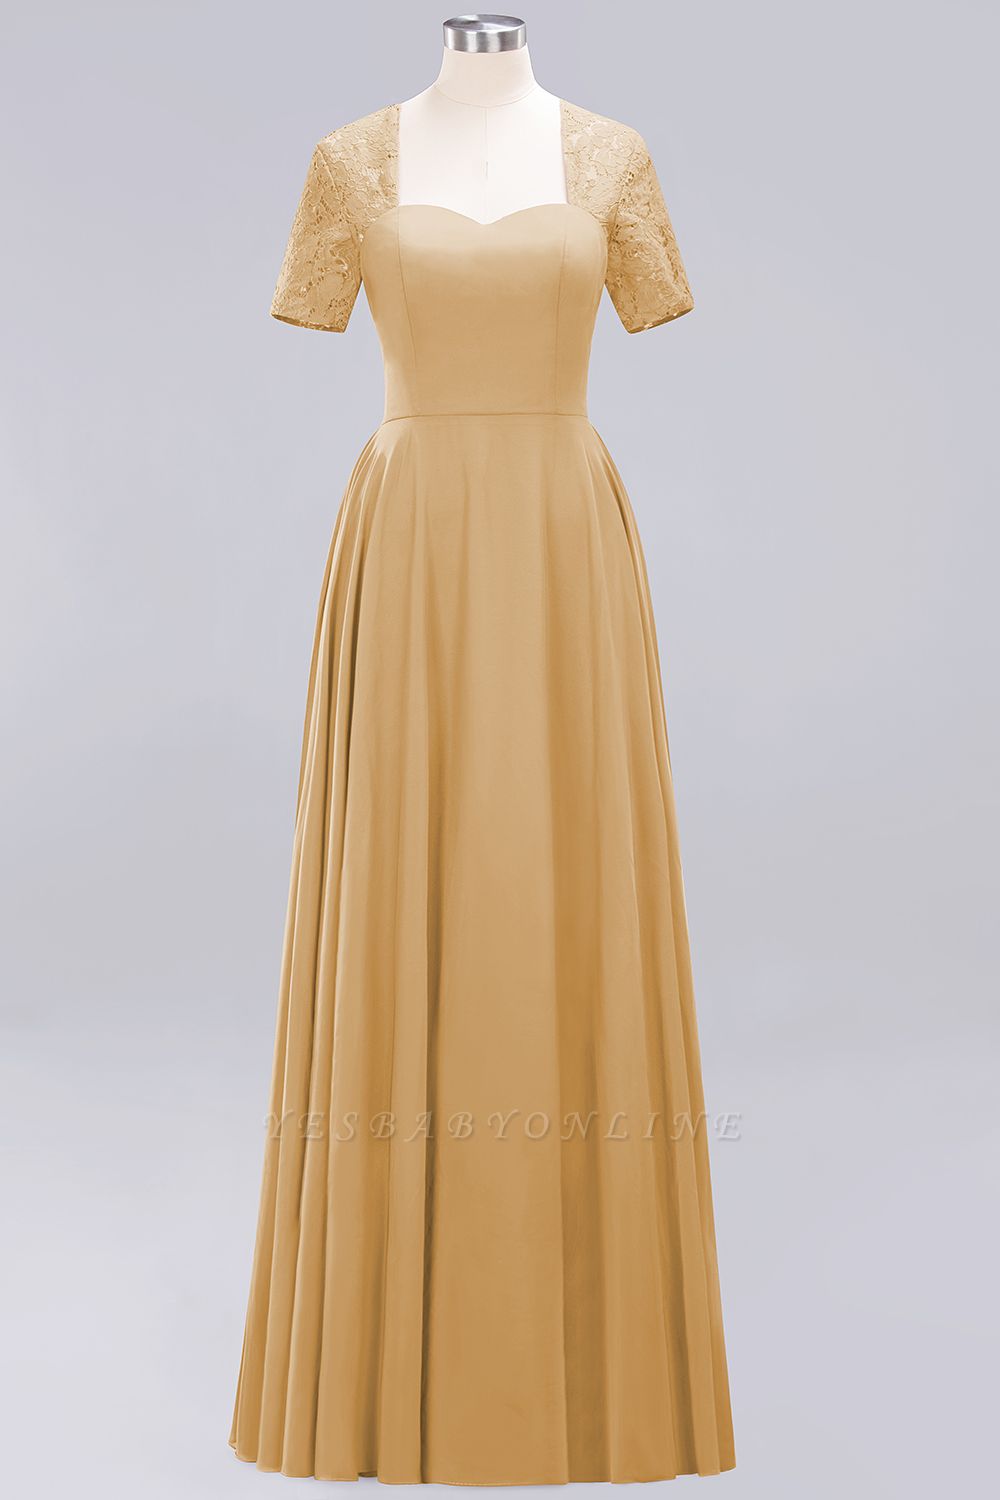 A-Line Chiffon Bridesmaid Dresses | Sweetheart Cap Sleeves Lace Wedding Party Dresses